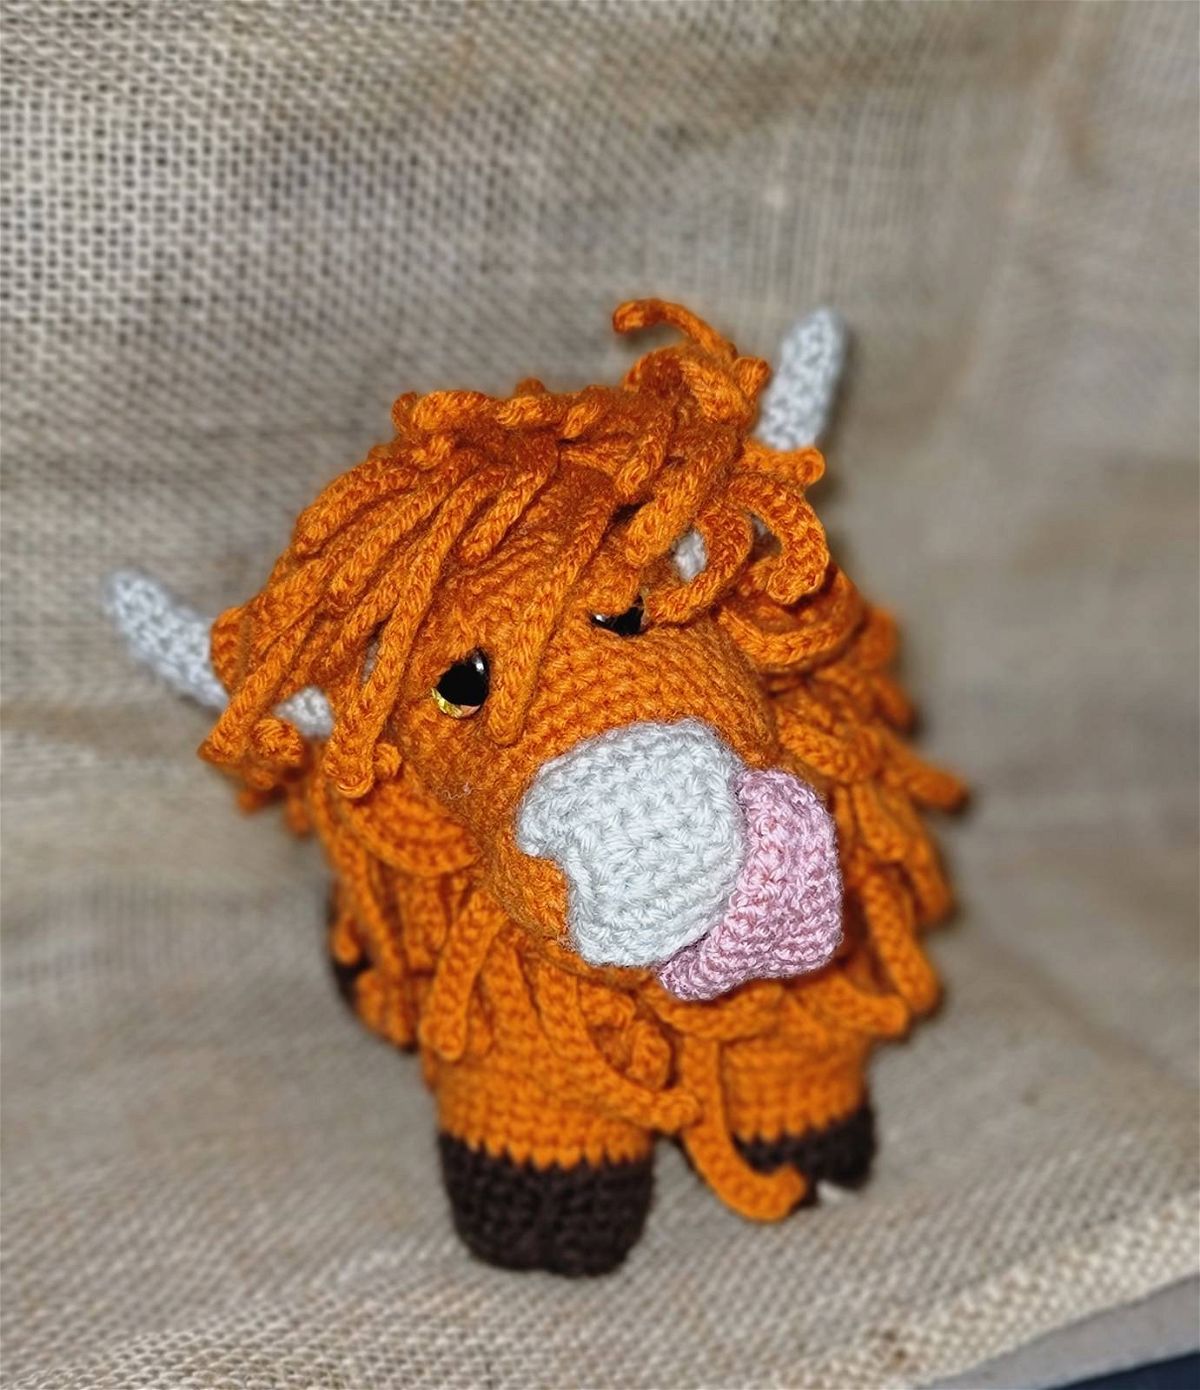 Highland cow doll photo review